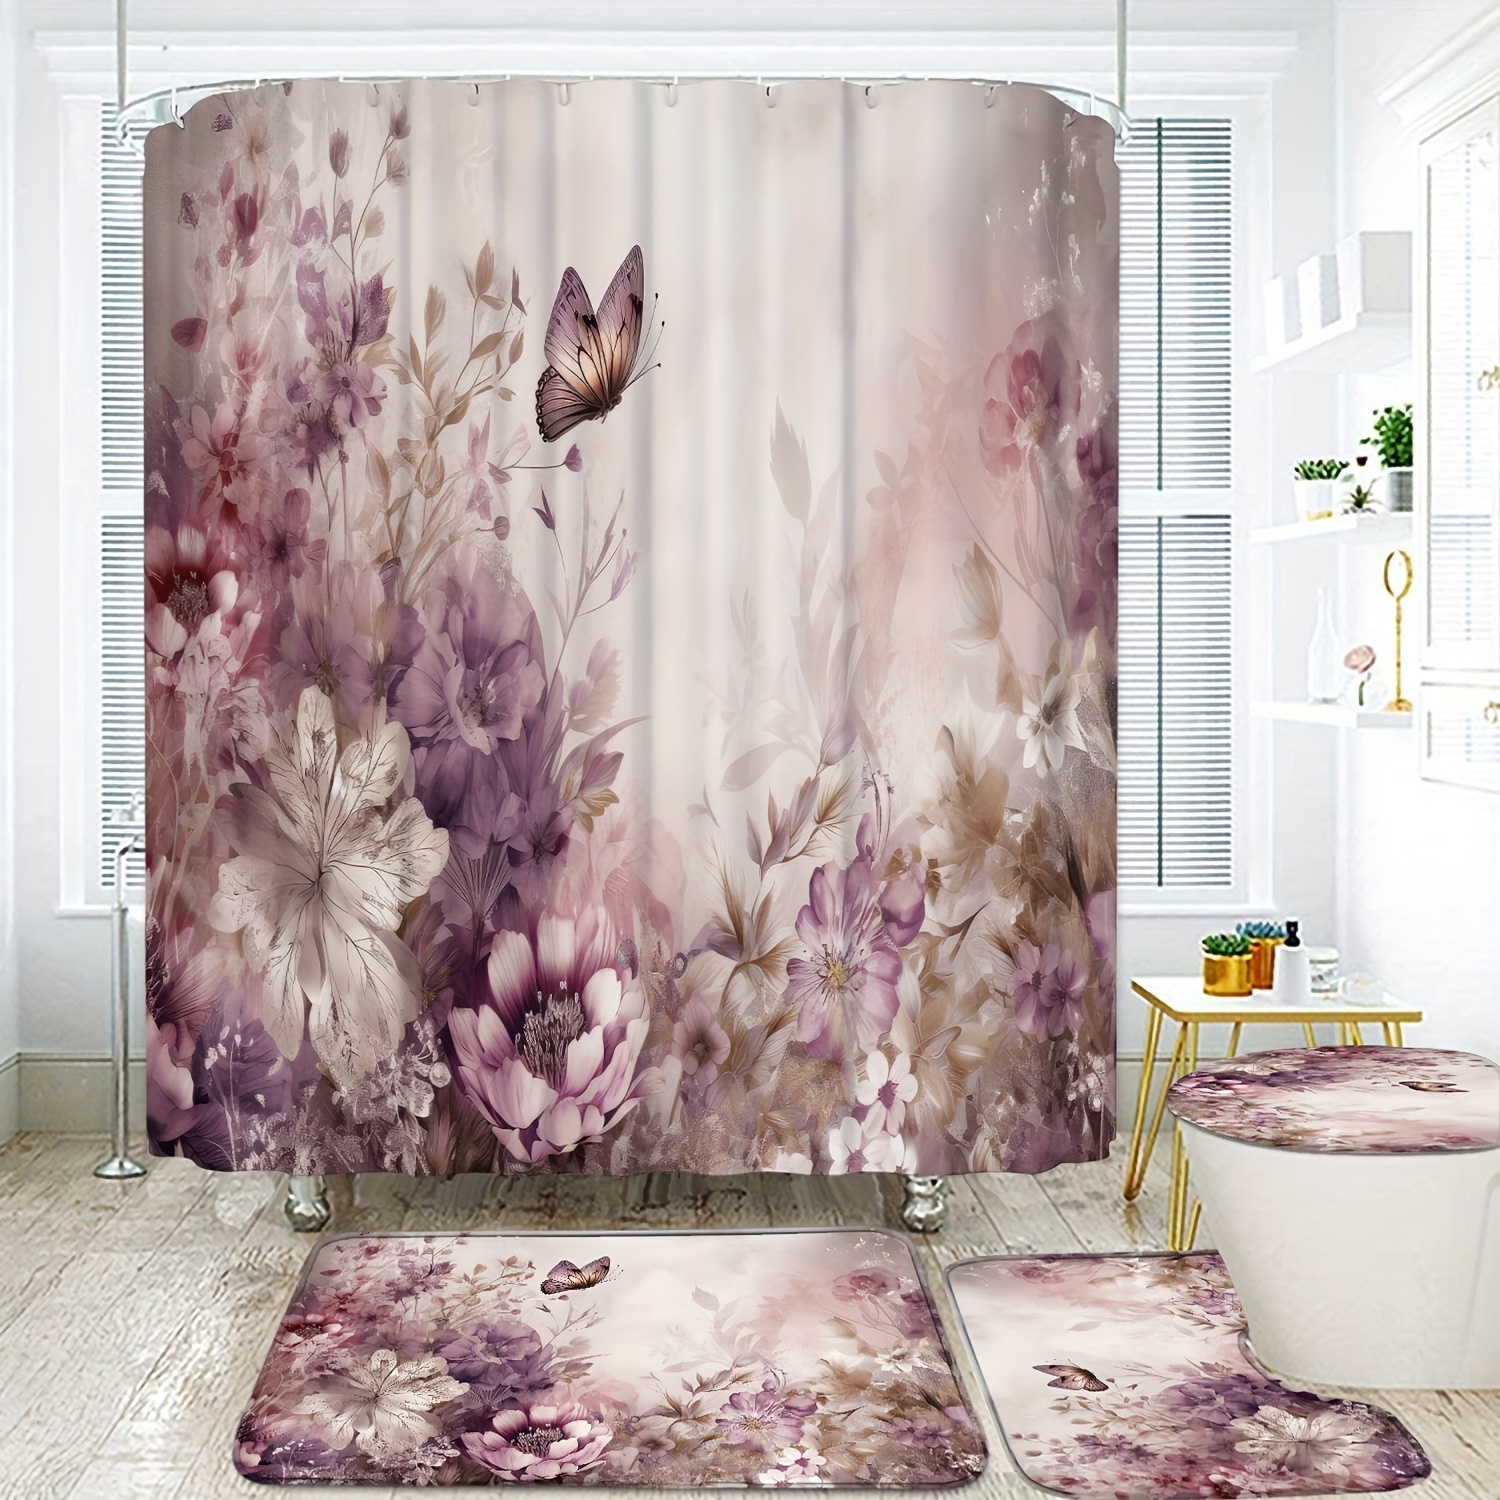 

4pcs Pink Floral Pattern Shower Curtain Set, Waterproof Bath Partition Curtain With Hooks, U-shaped Mat, Toilet Cover Mat, L-shaped Mat, Bathroom Accessories, Home Bathroom Decorations